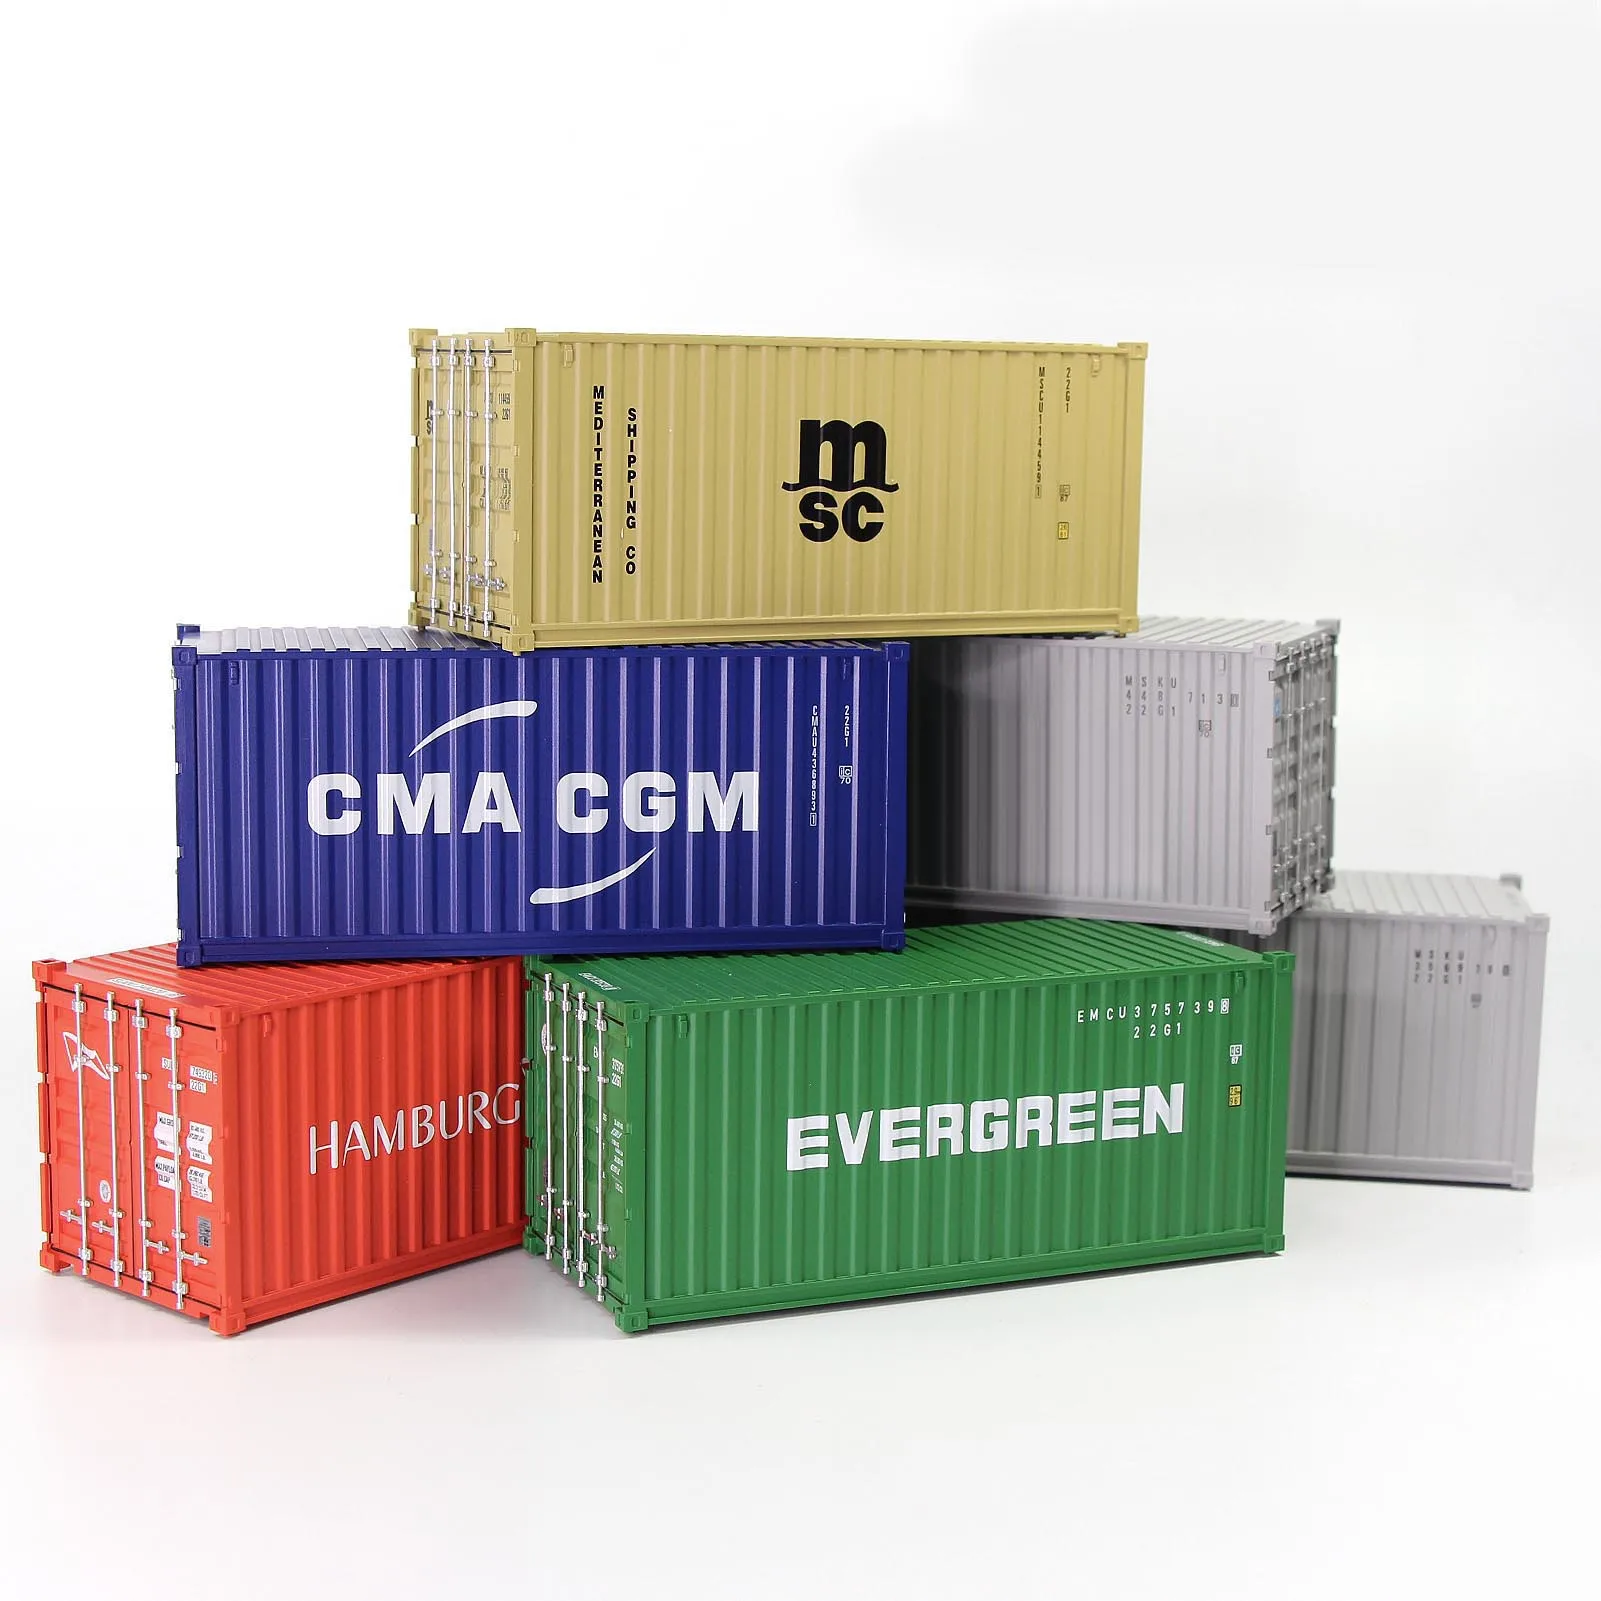 

C4320 Model Train Railway Layout 20ft 1:48 O Scale Freight Container Shipping Contanier Freight Cars Wagons